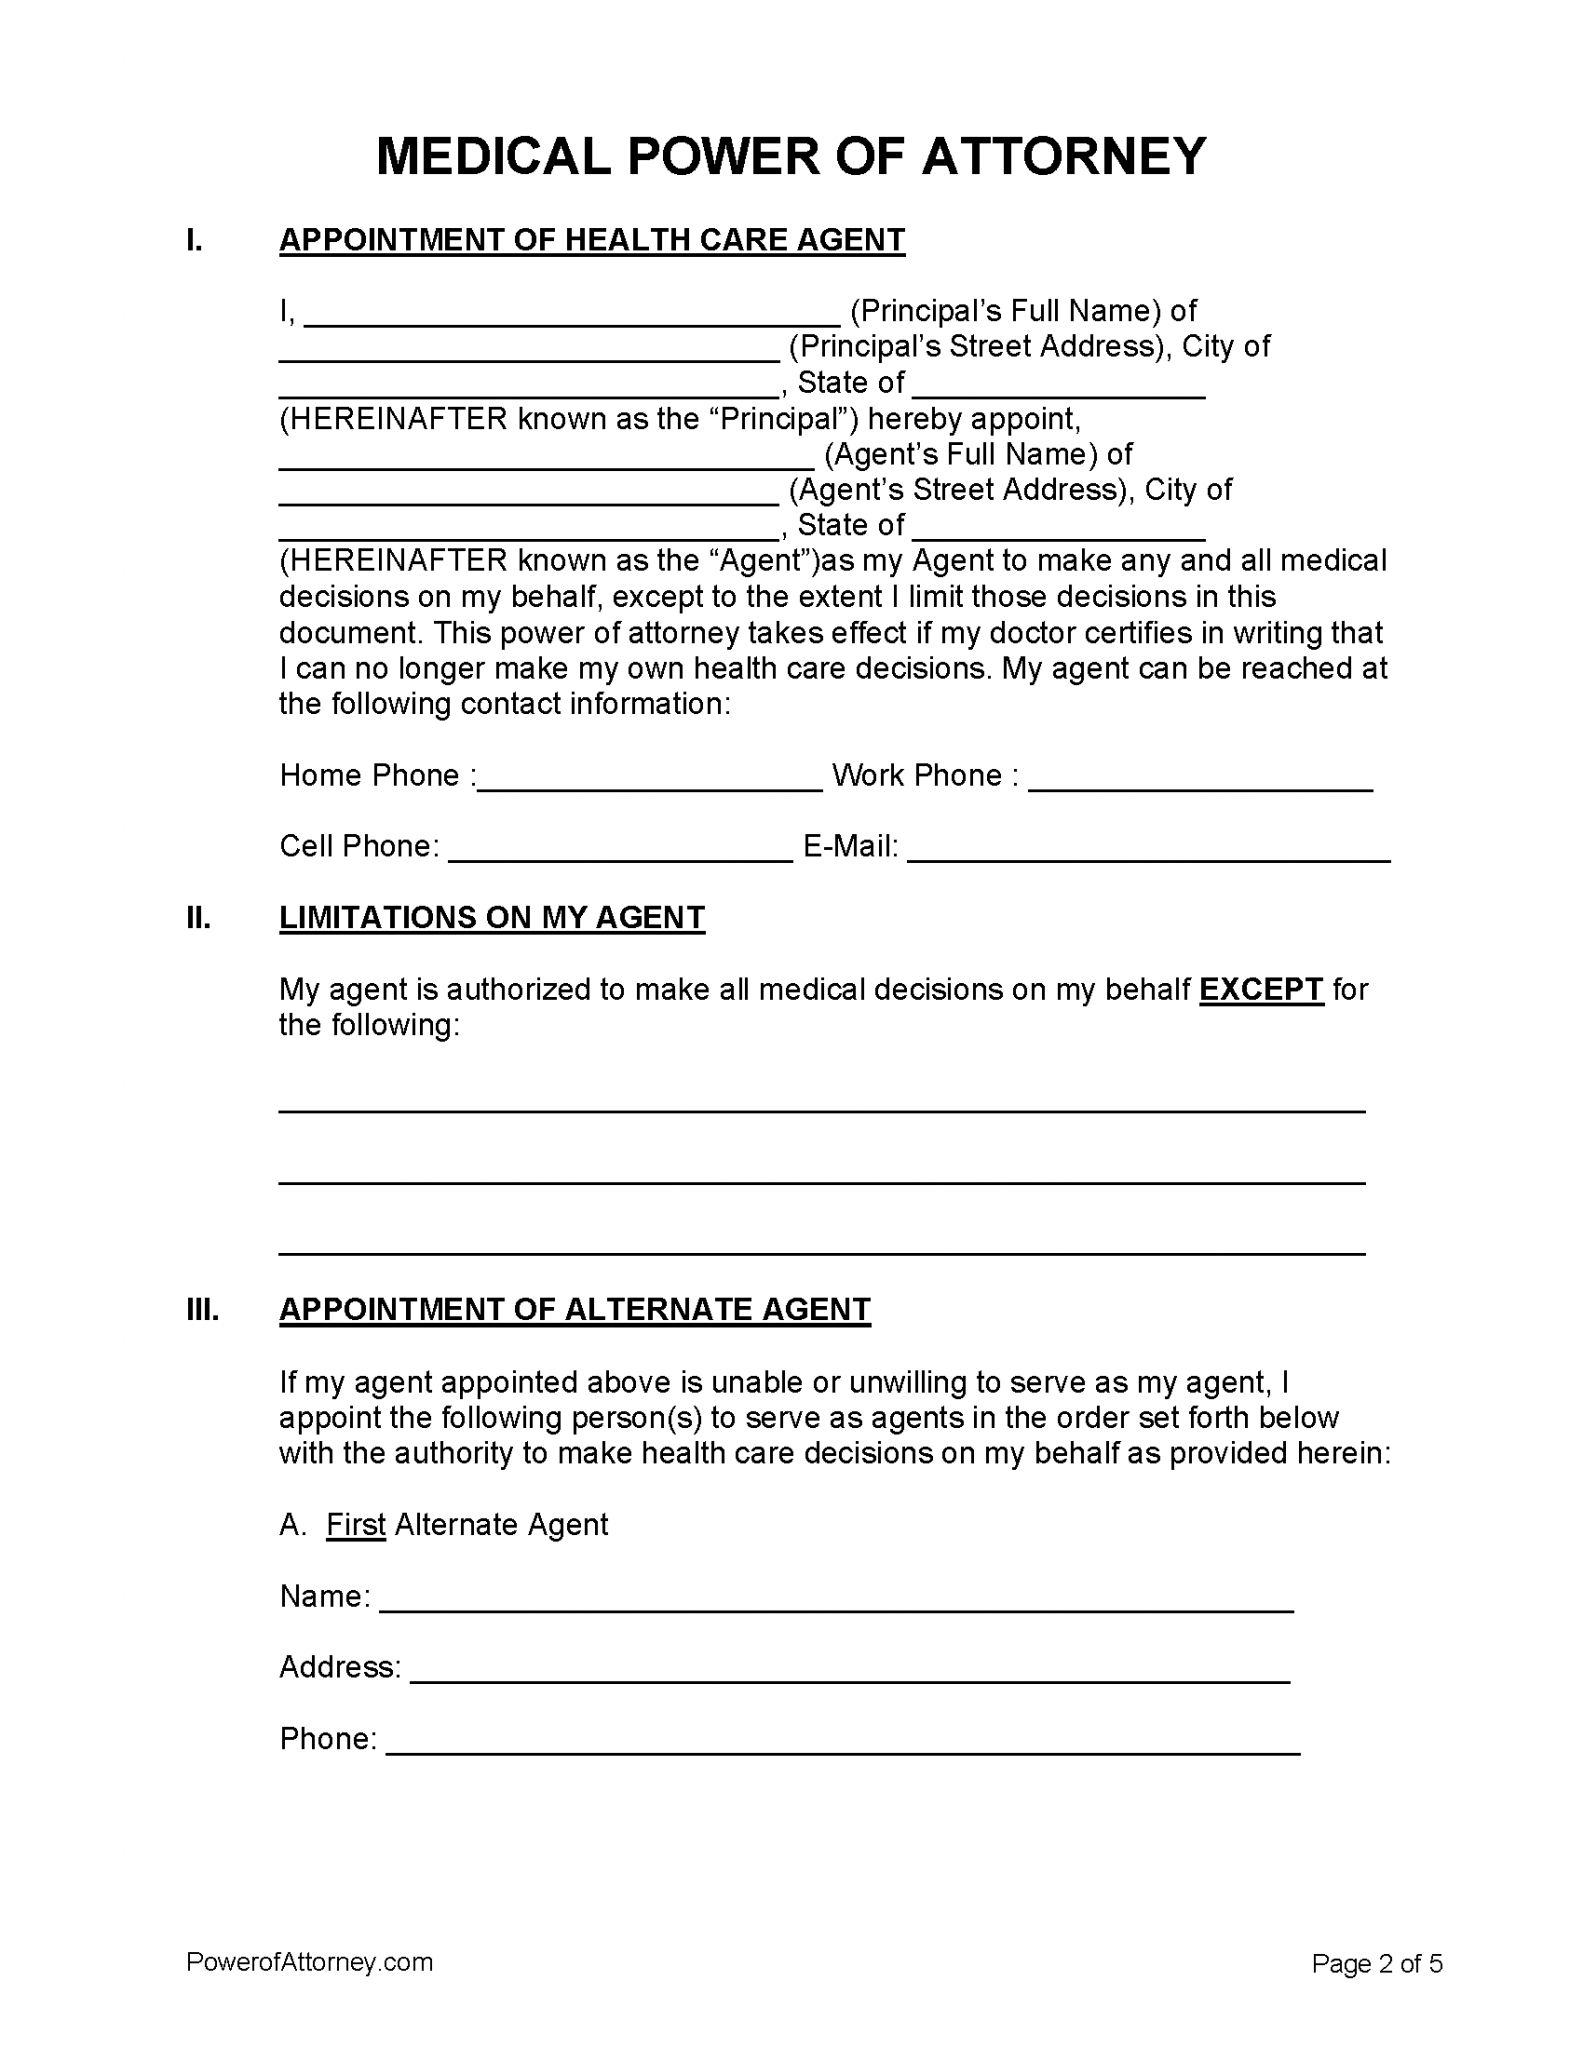 medical-power-of-attorney-forms-free-printable